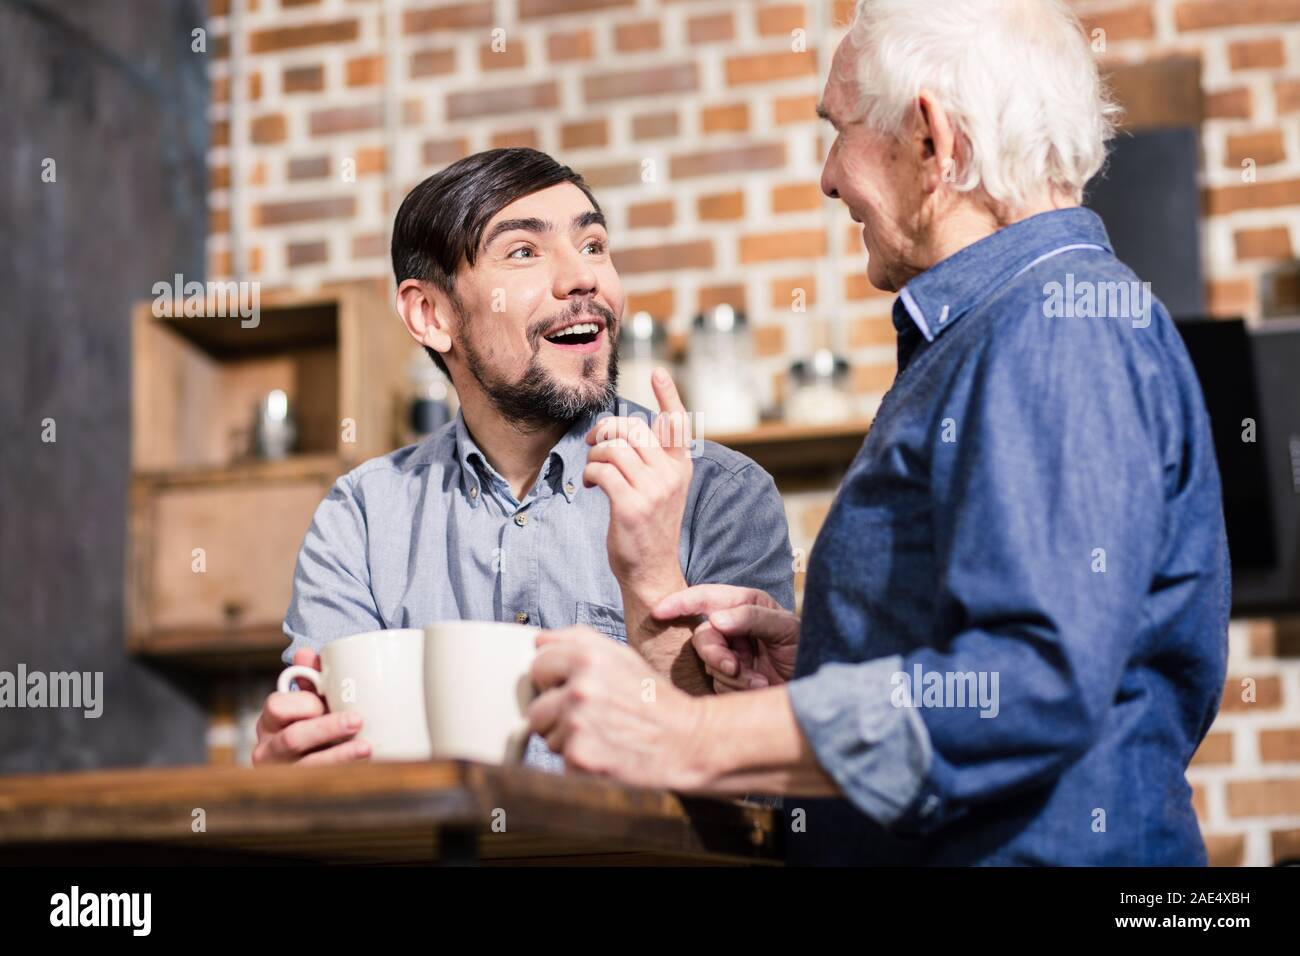 Cheerful man talking with his father in the kitchen Stock Photo